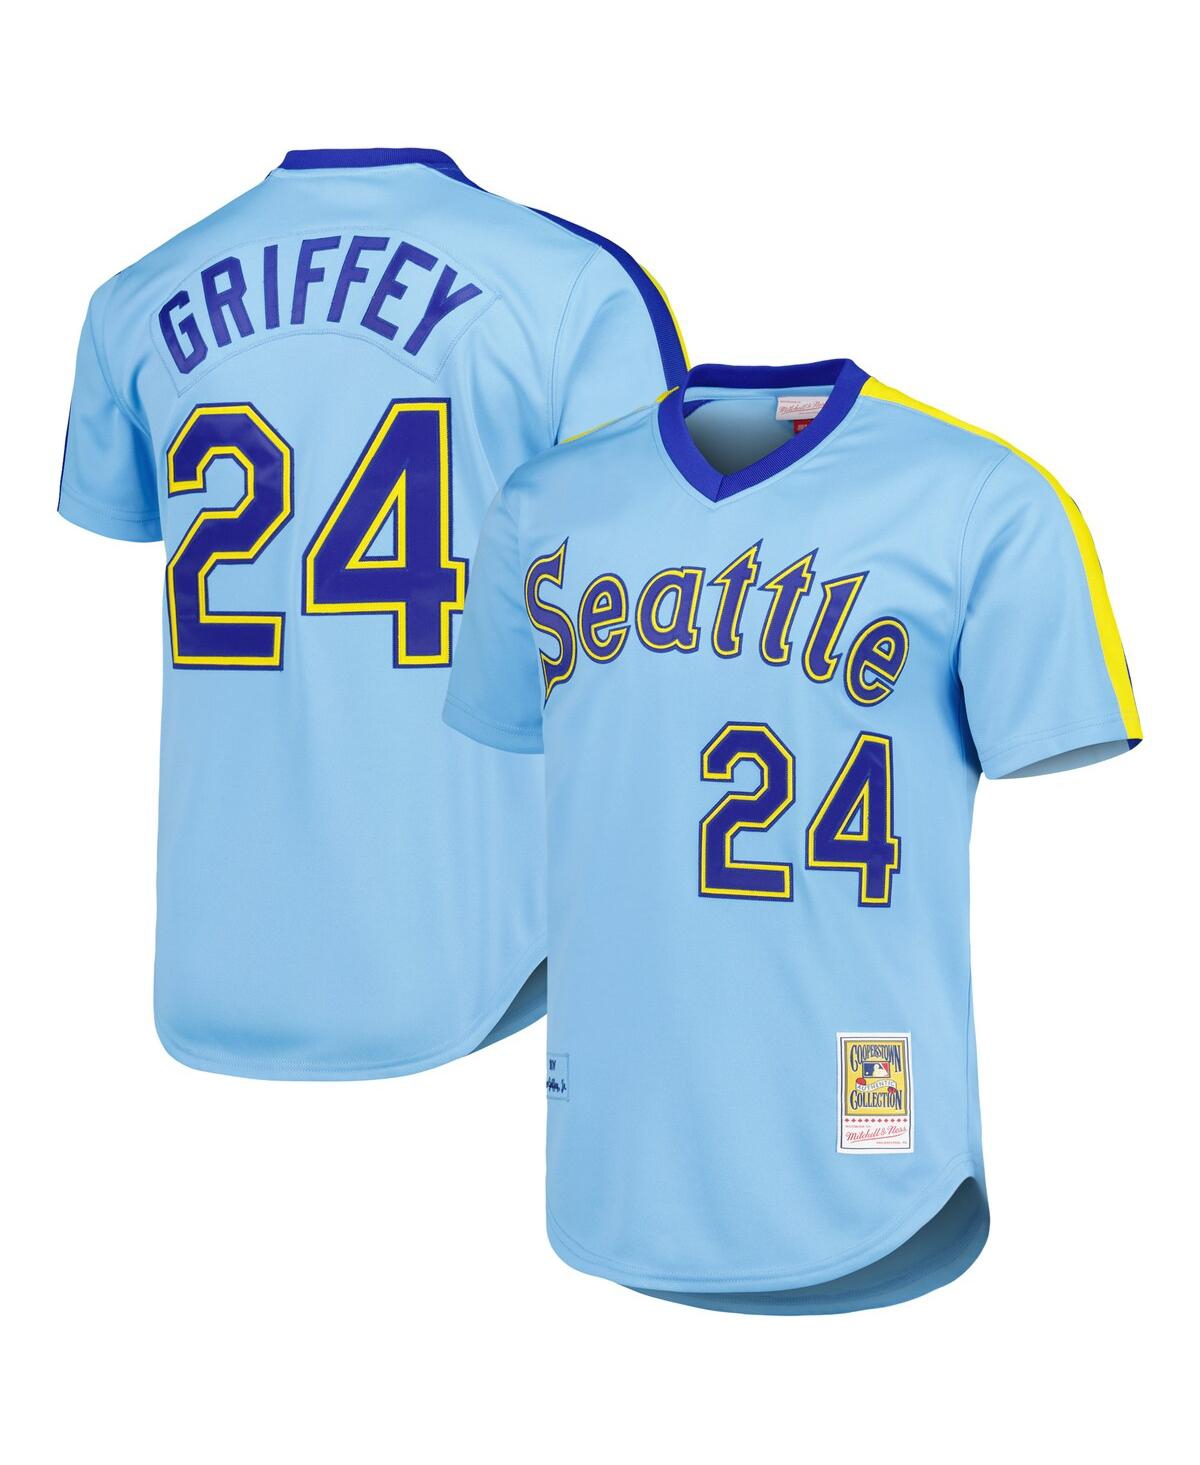 Men's Mitchell & Ness Ken Griffey Jr. Light Blue Seattle Mariners Cooperstown Collection Authentic Jersey - Light Blue